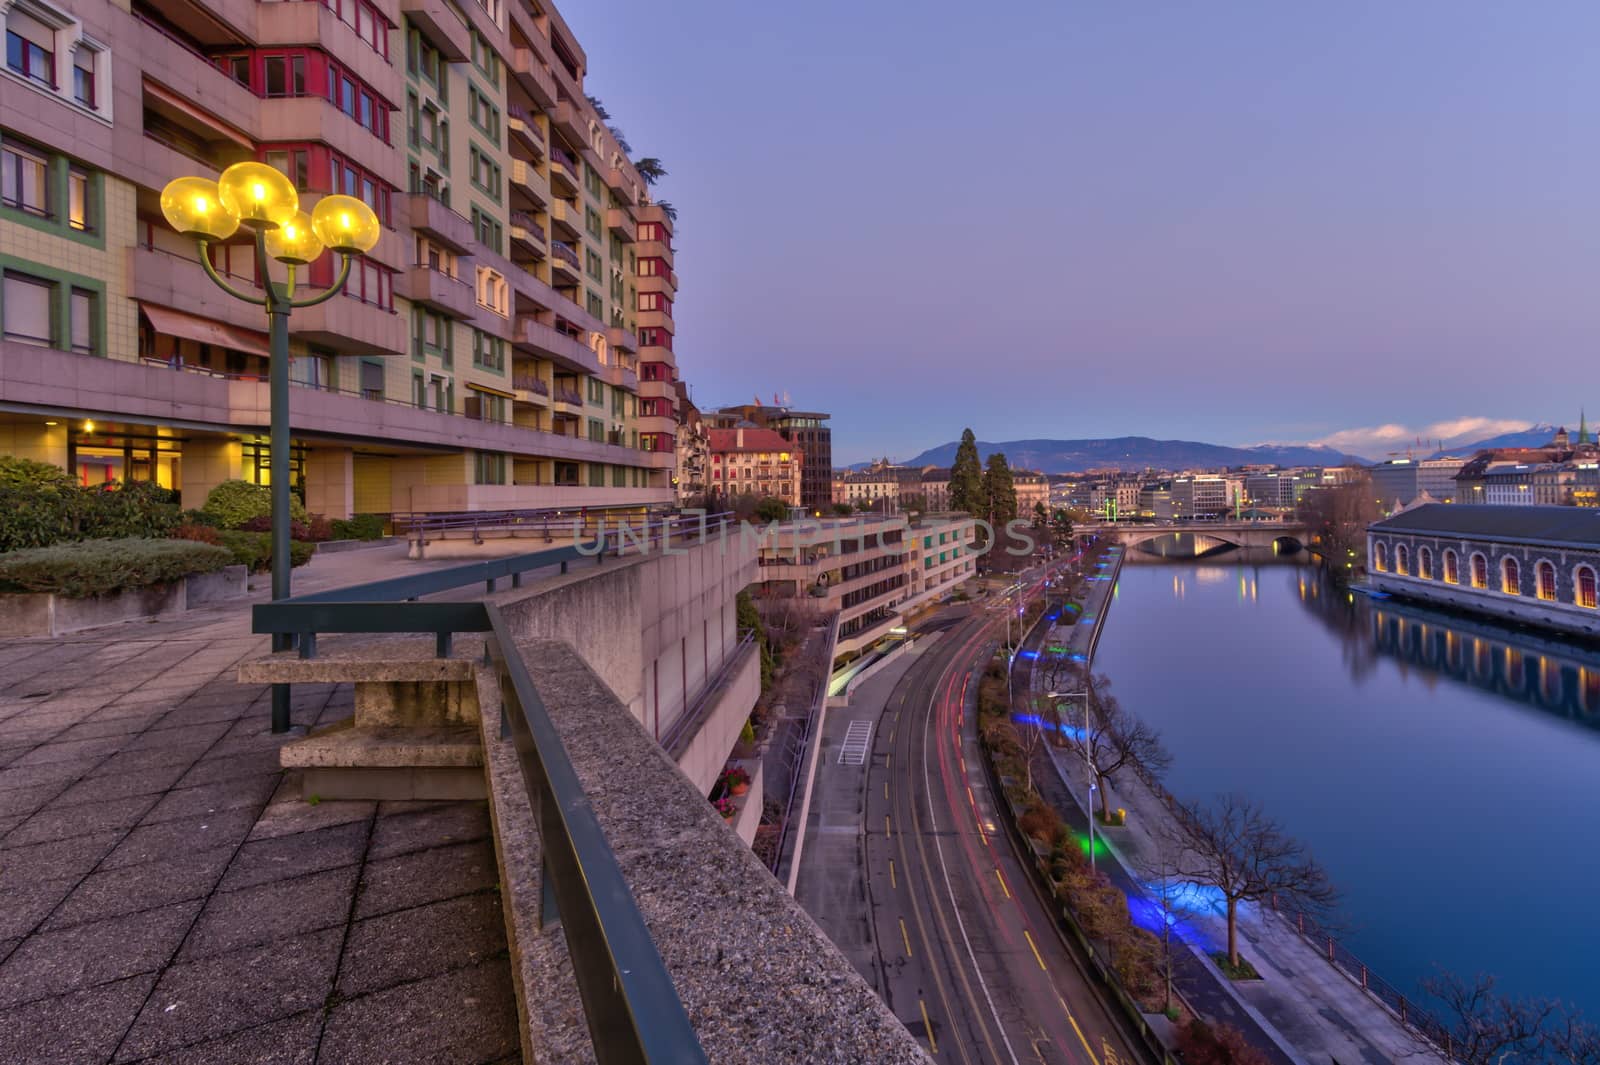 Rhone river and old buildings, Geneva, Switzerland - HDR by Elenaphotos21